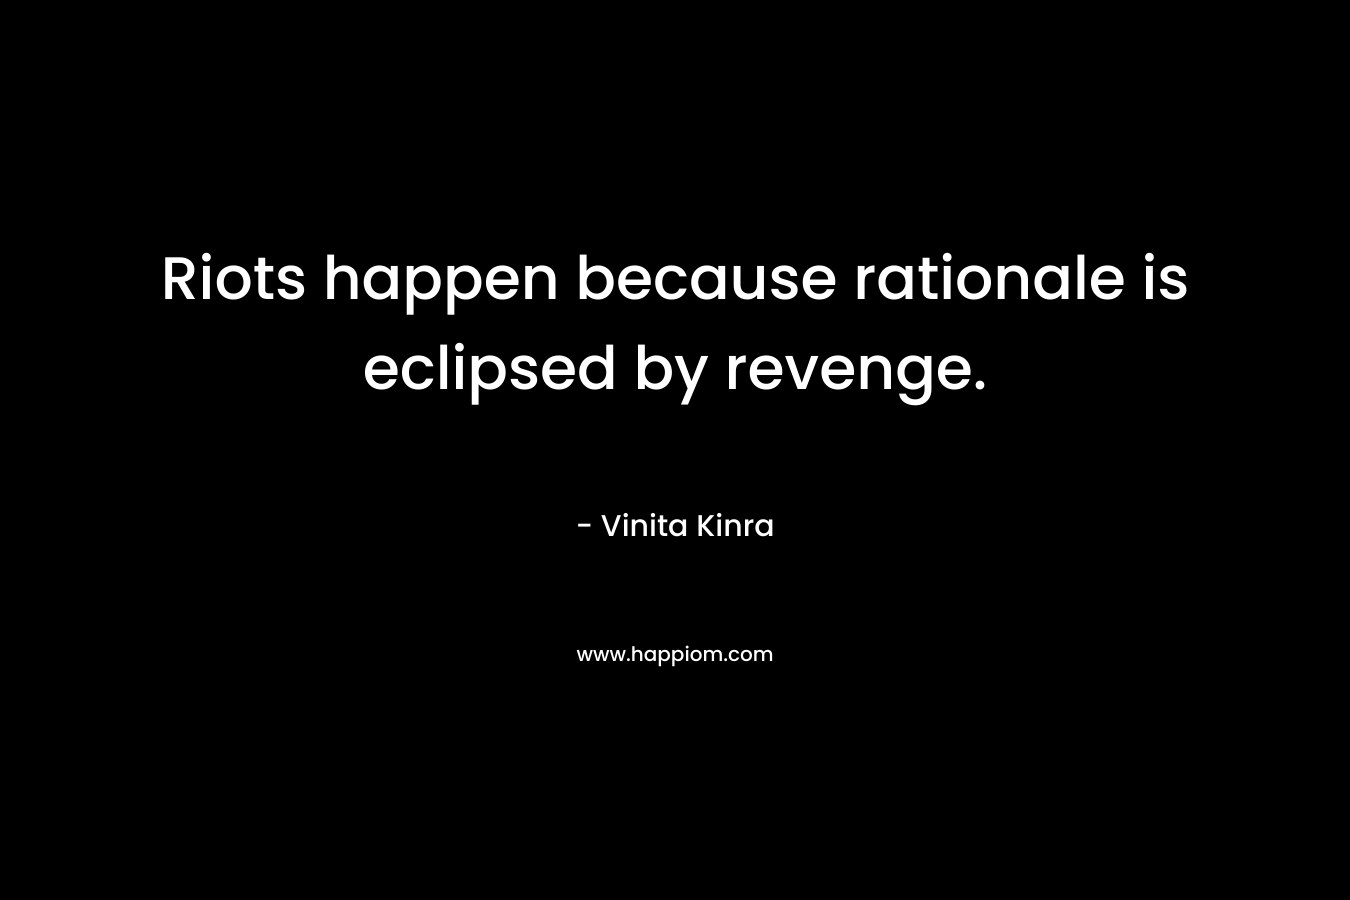 Riots happen because rationale is eclipsed by revenge.